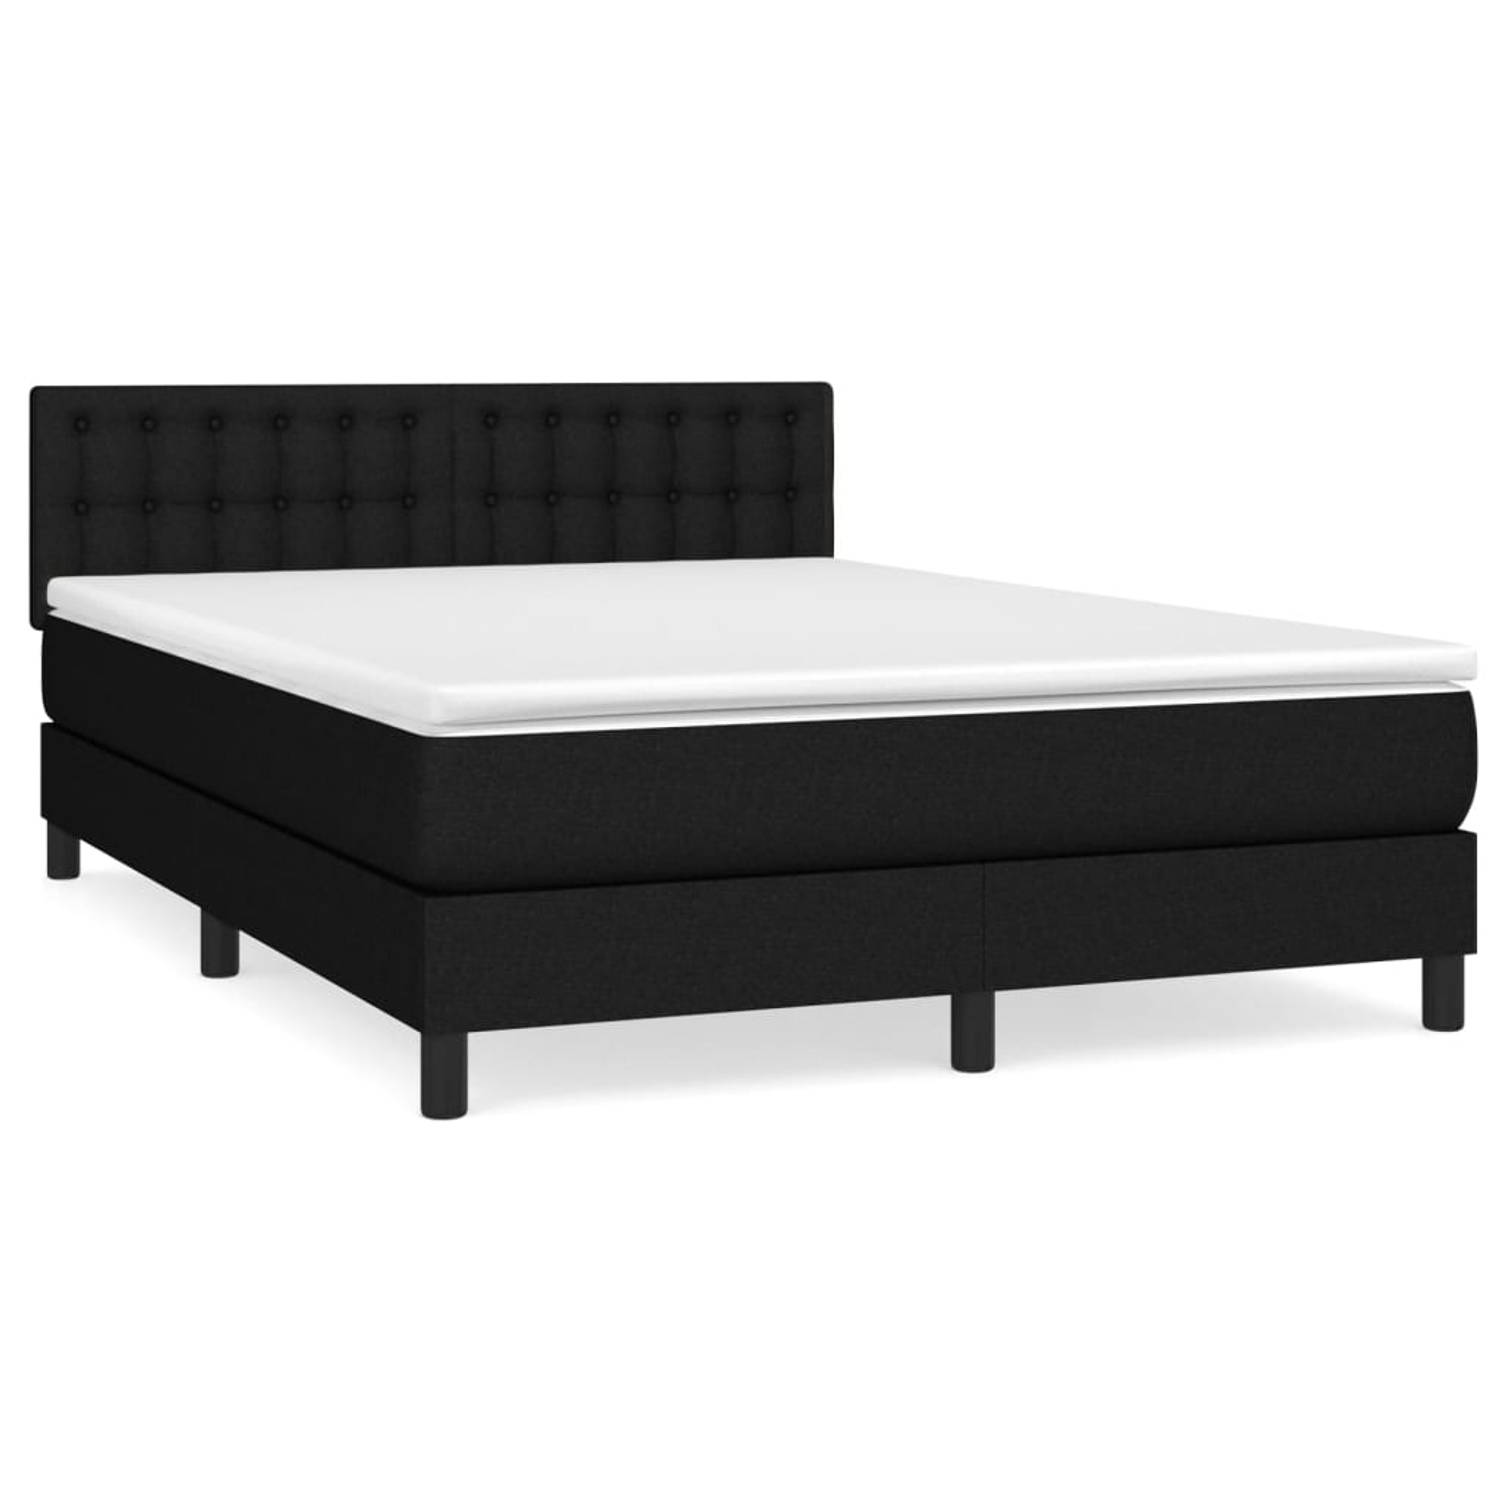 The Living Store Boxspringbed - Comfort - Bed - 193 x 144 x 78/88 cm - Zwart